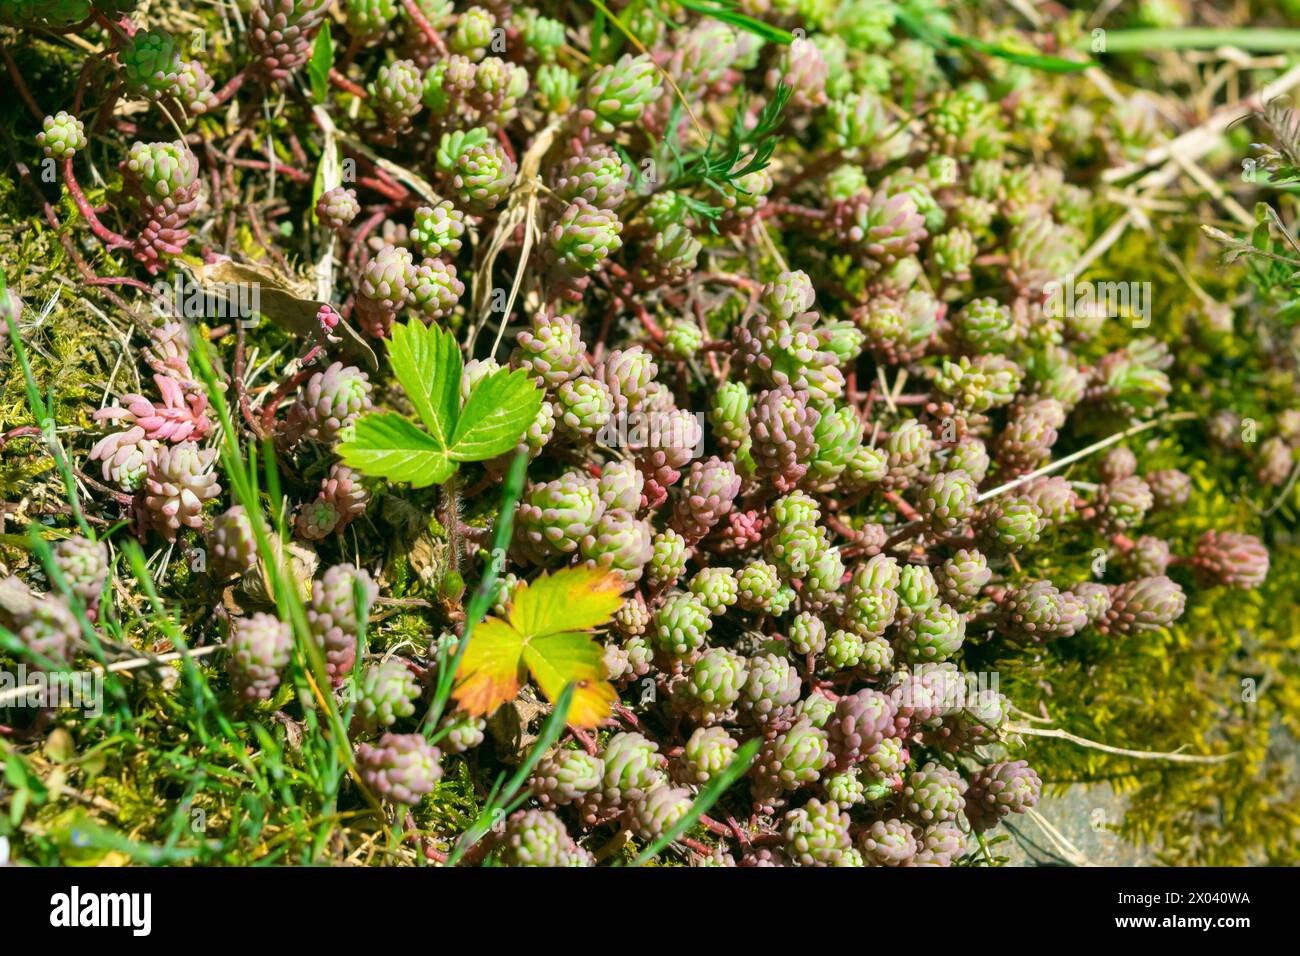 Sedum hispanicum, the Spanish stonecrop growing in a clearing, close-up. plant in the family Crassulaceae. Stock Photo